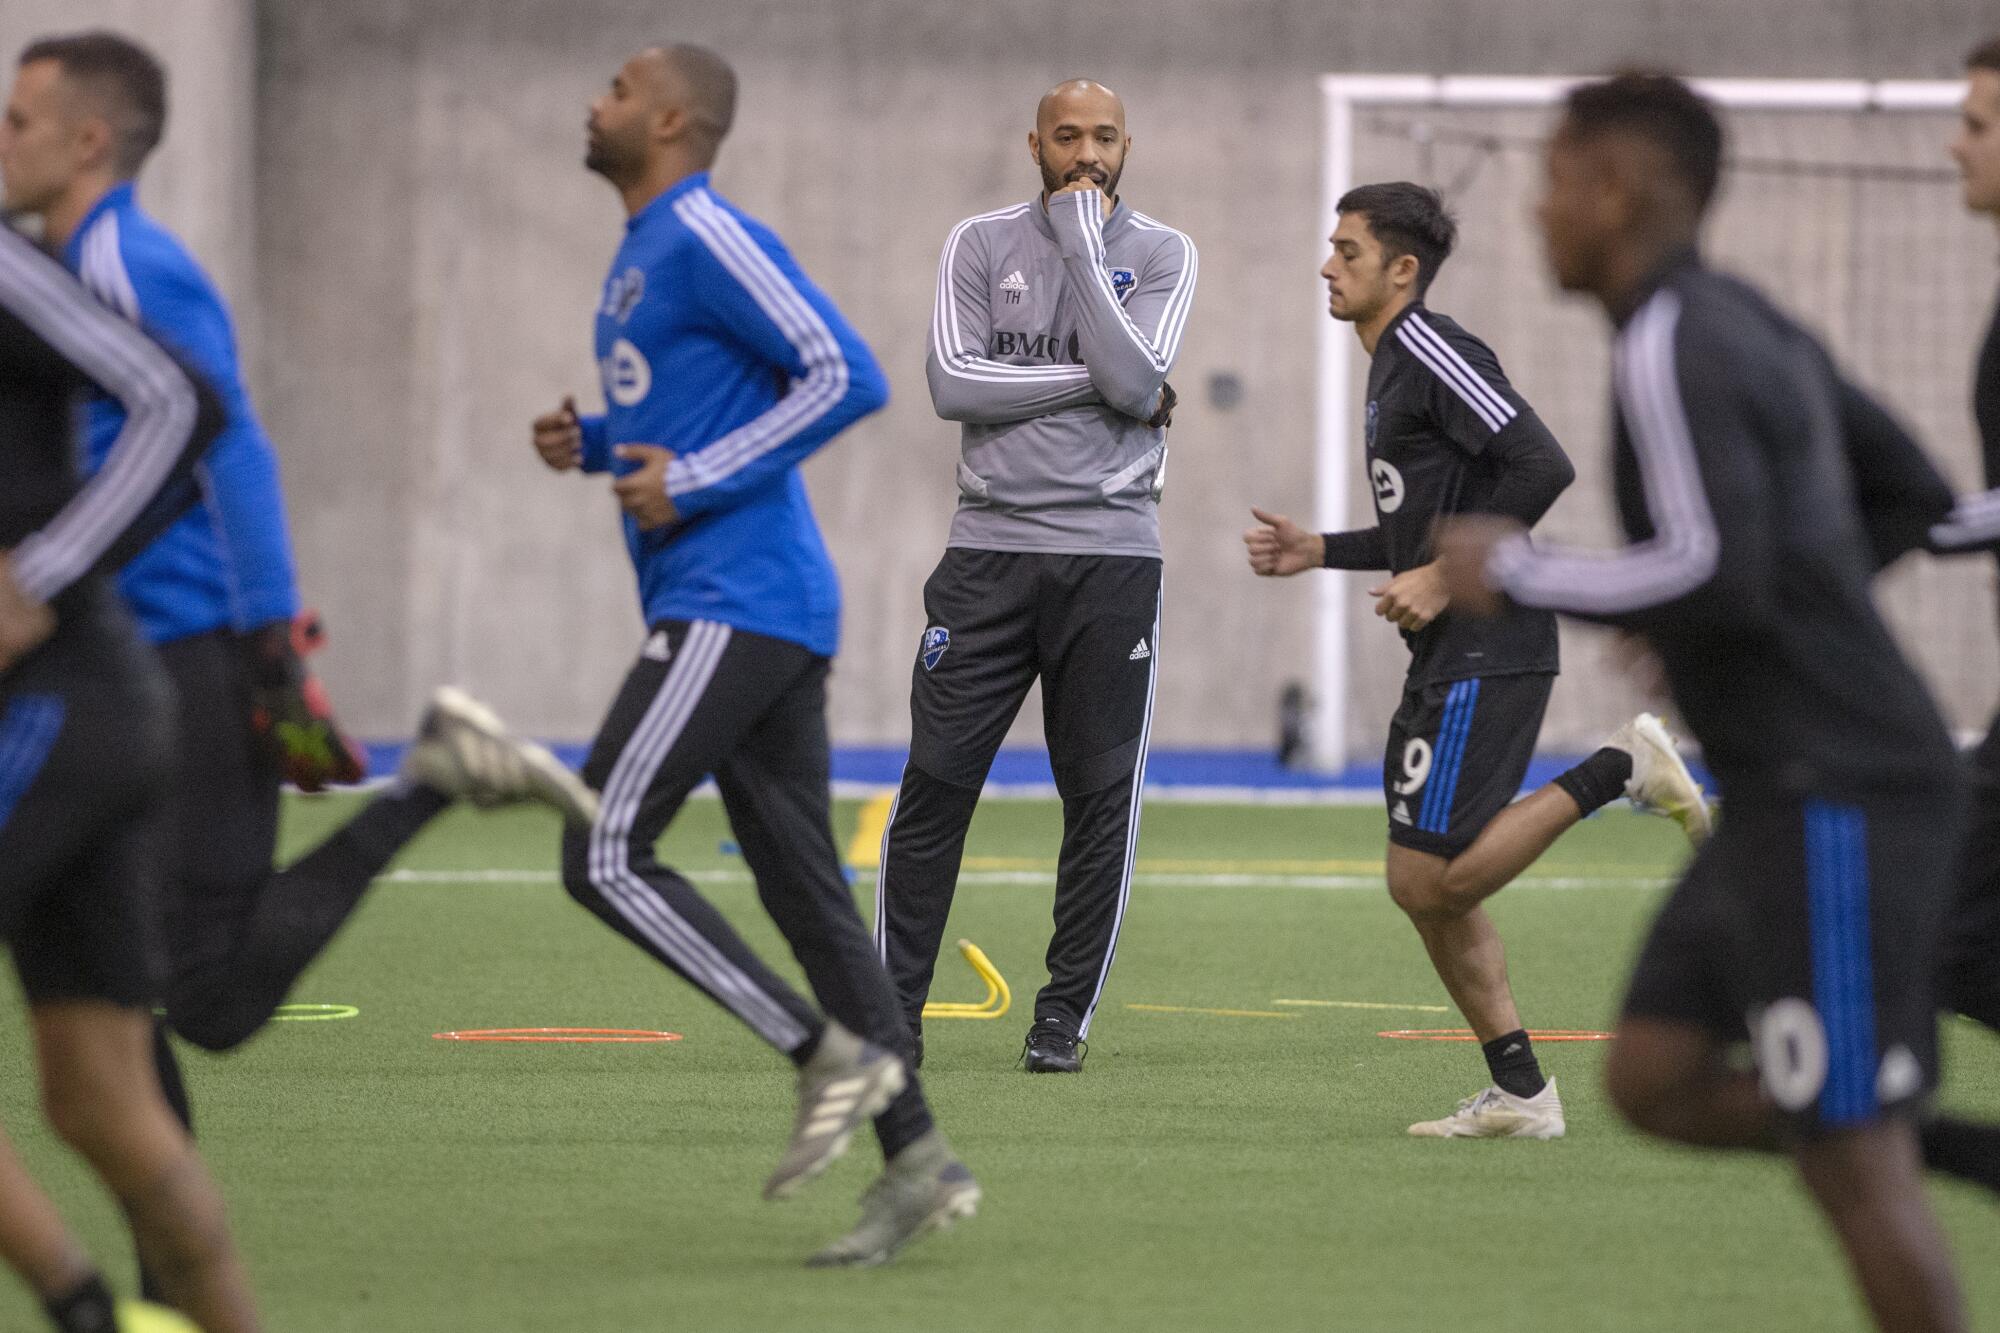 Thierry Henry standing in the middle of a soccer field with players running past him at a practice